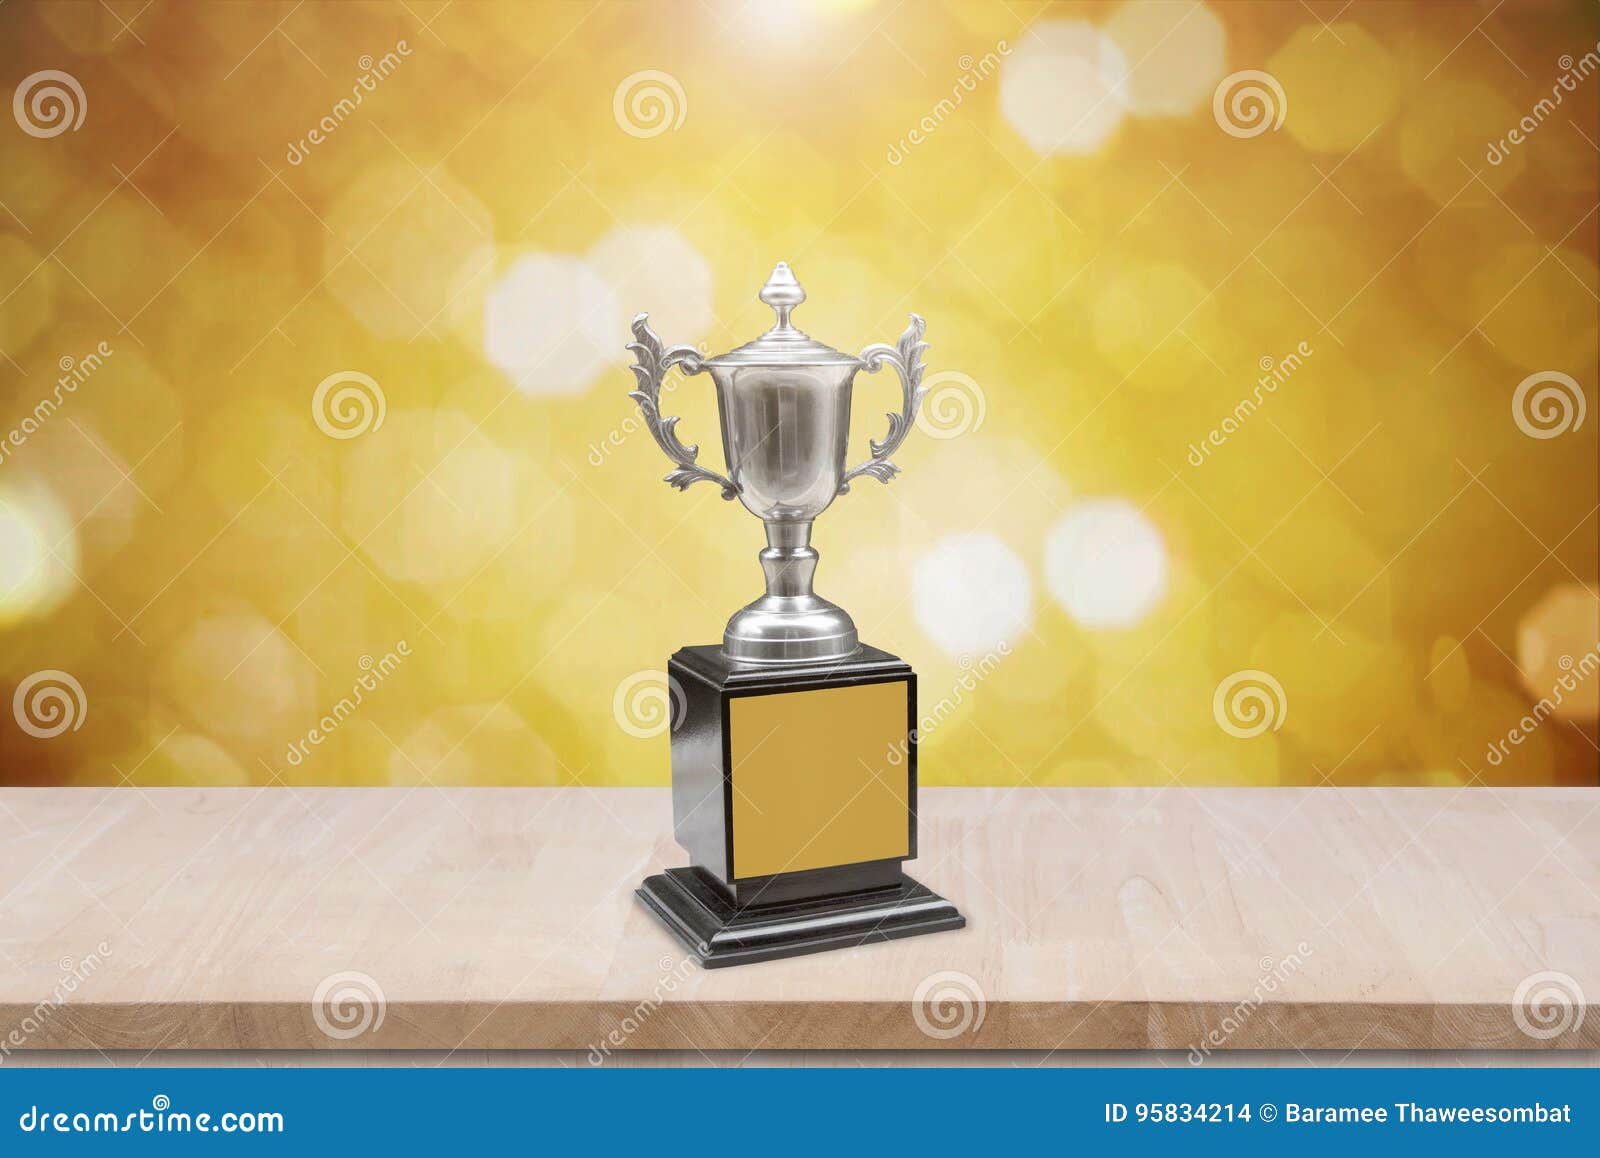 Champion Photos Free & Royalty-Free Stock from Dreamstime